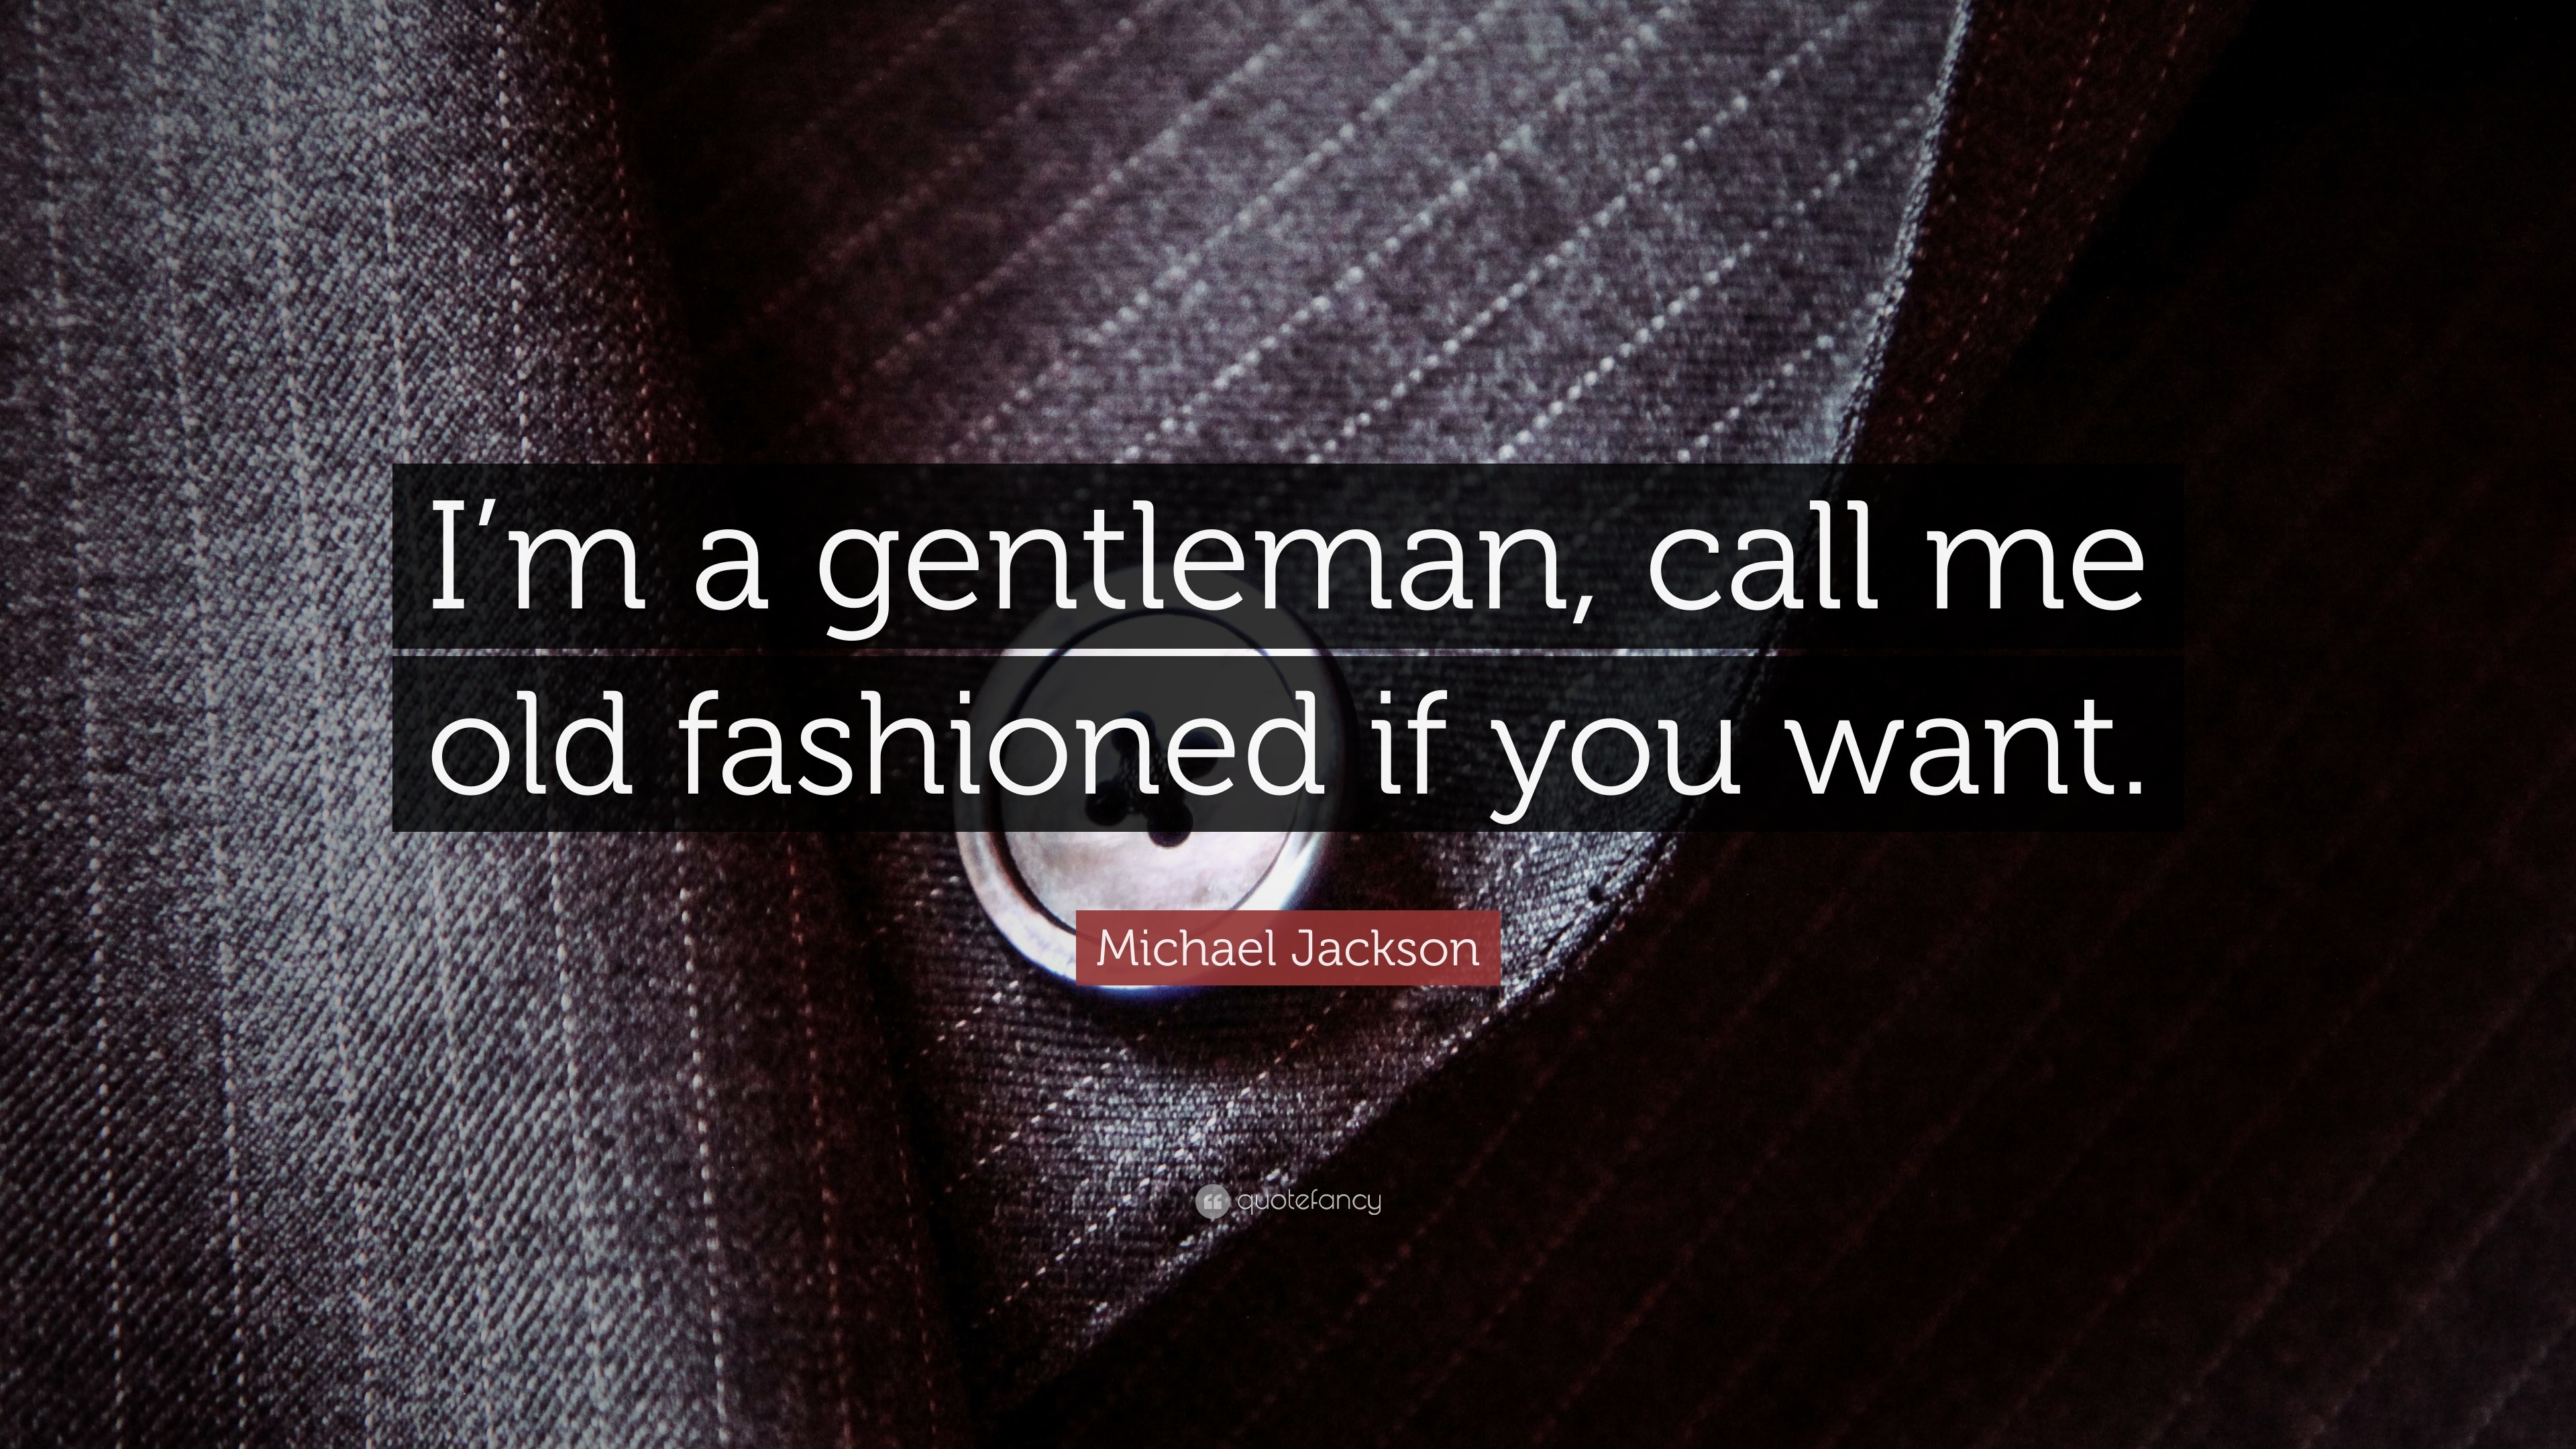 3840x2160 Michael Jackson Quote: “I'm a gentleman, call me old fashioned if